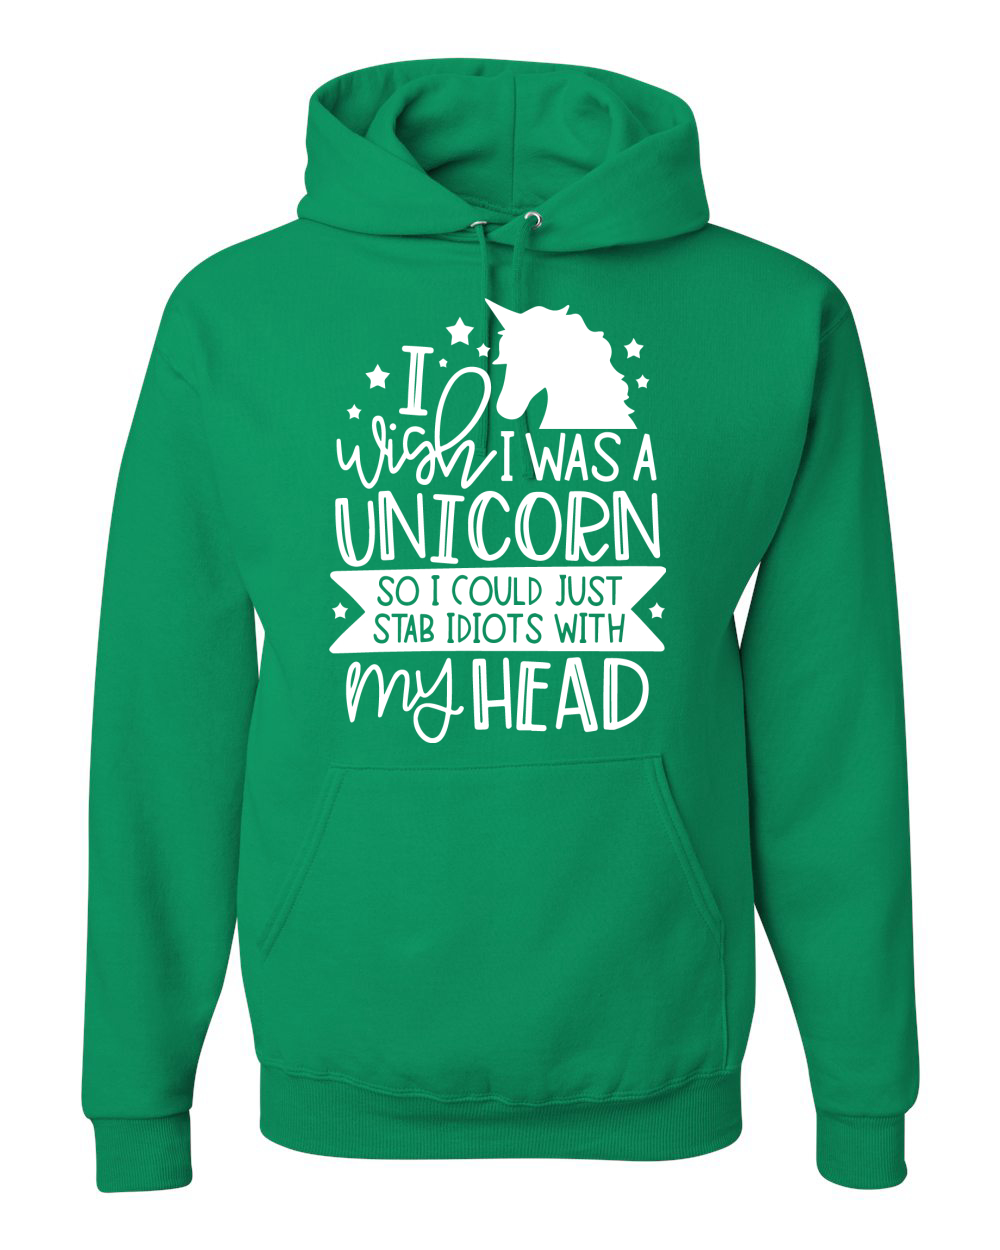 Funny Novelty Hoodie Hoody hooded Top I Wish I Was A Unicorn So I Could Stab P 